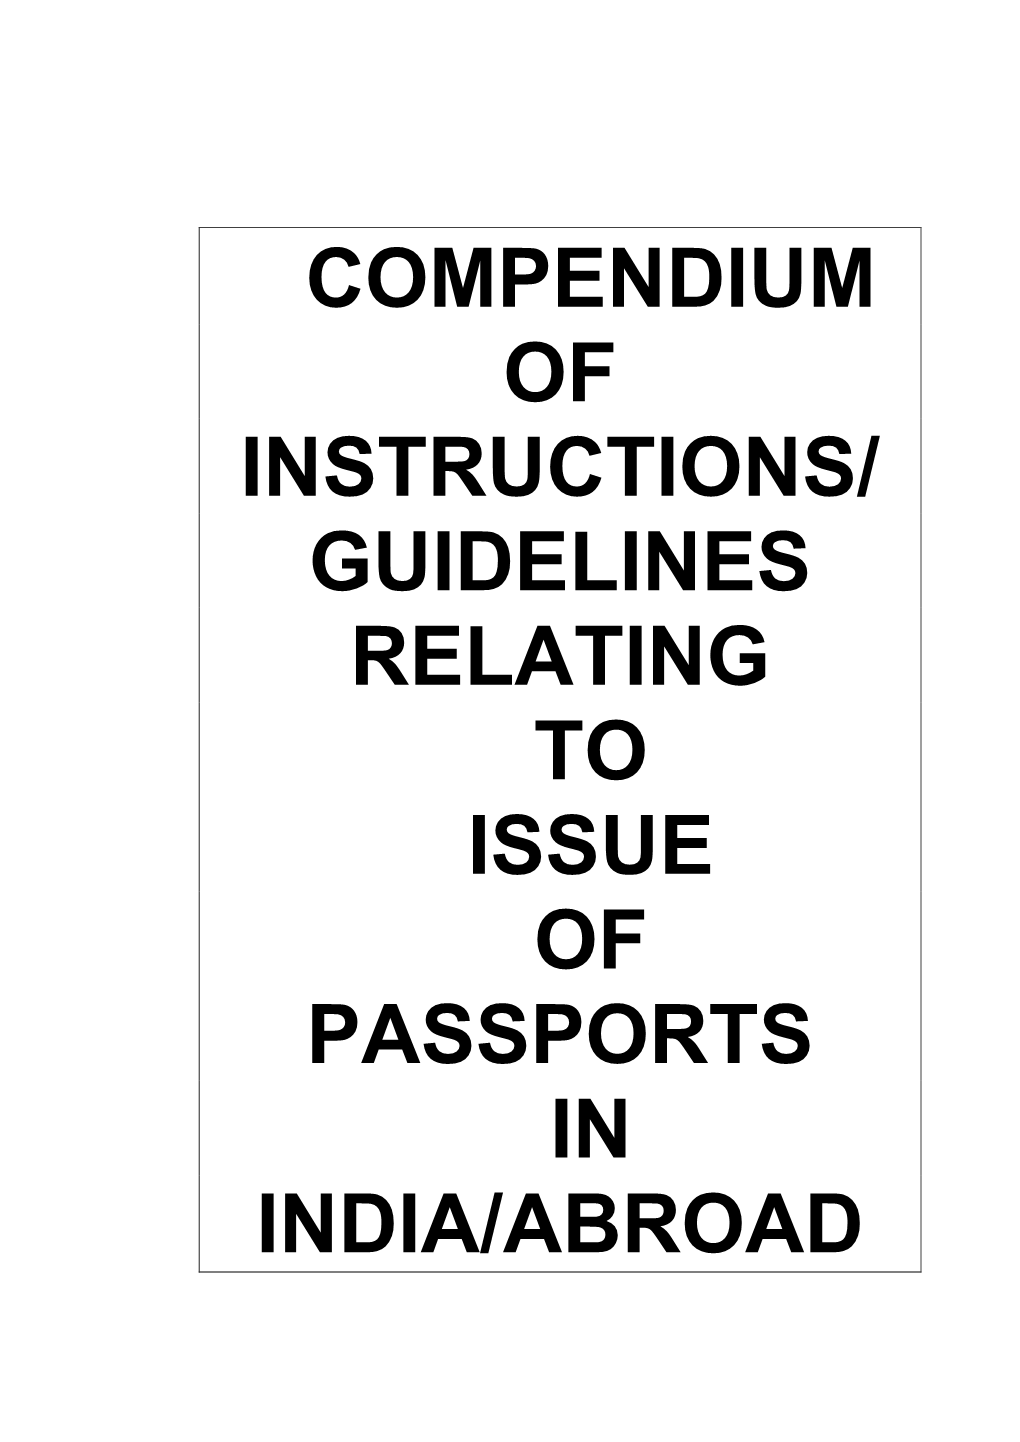 Guidelines Relating to Issue of Passports in India/Abroad